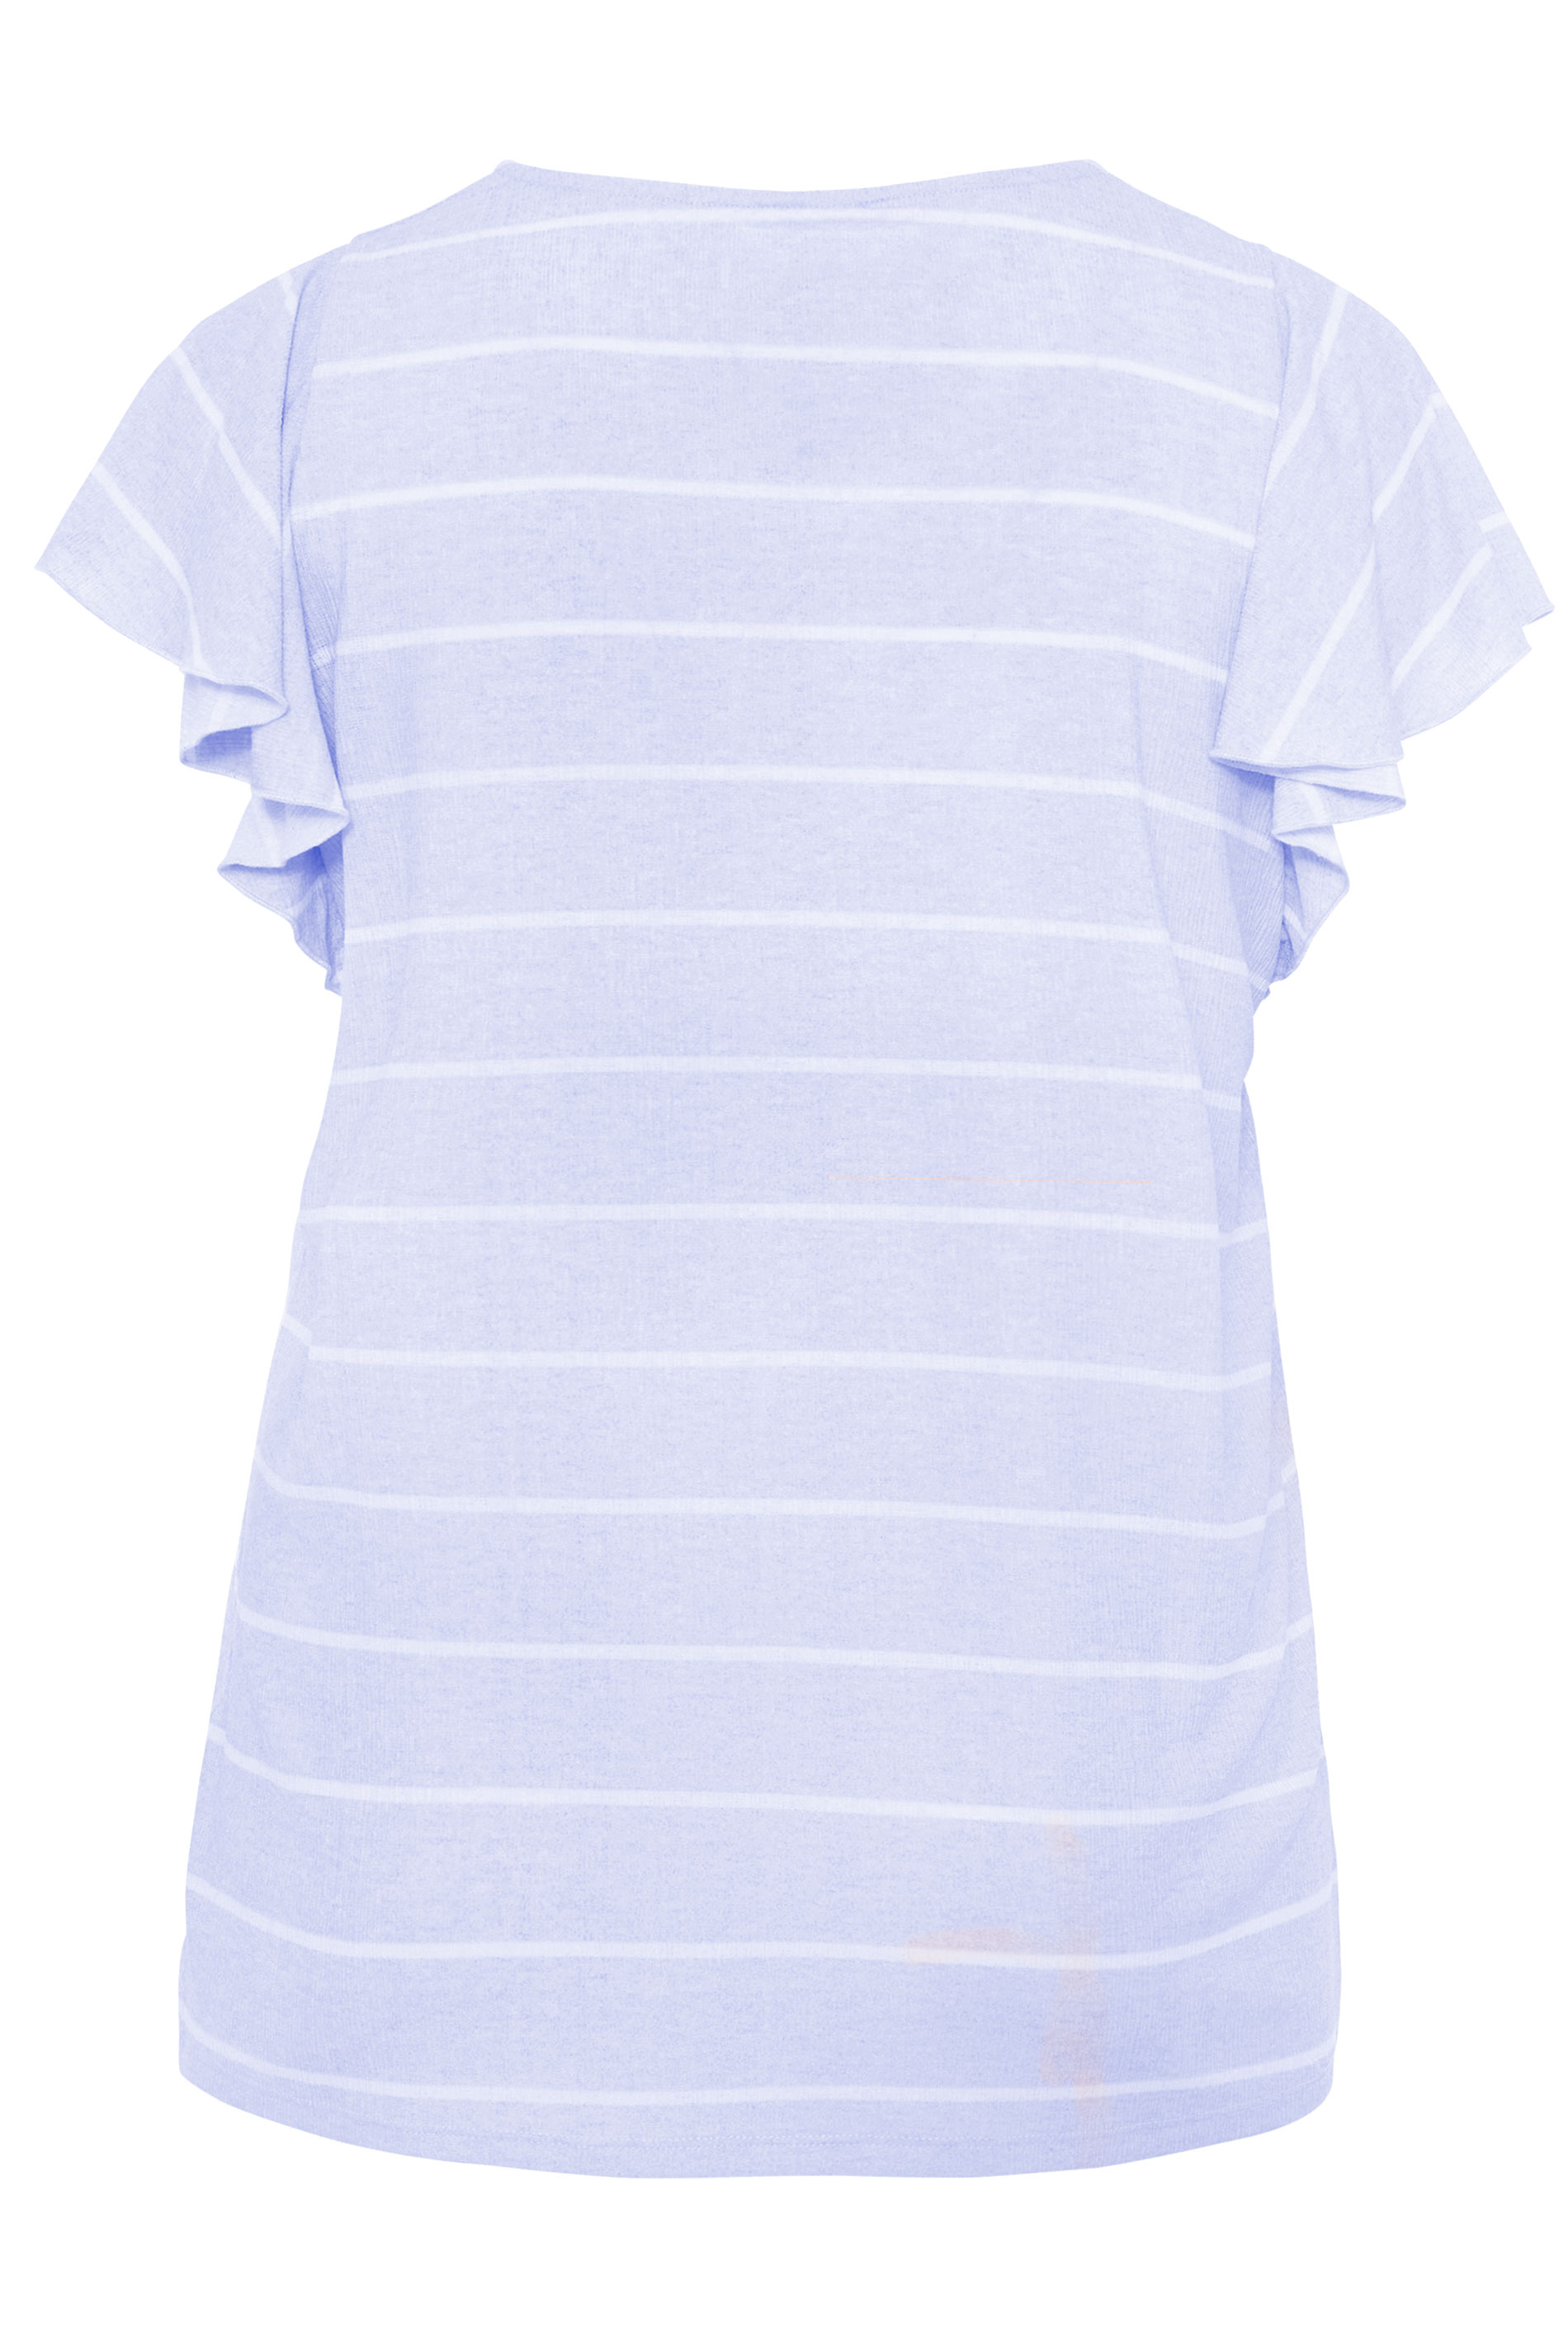 Grande taille  Tops Grande taille  Tops Casual | T-Shirt Bleu Imprimé Rayures Col V - XH39745